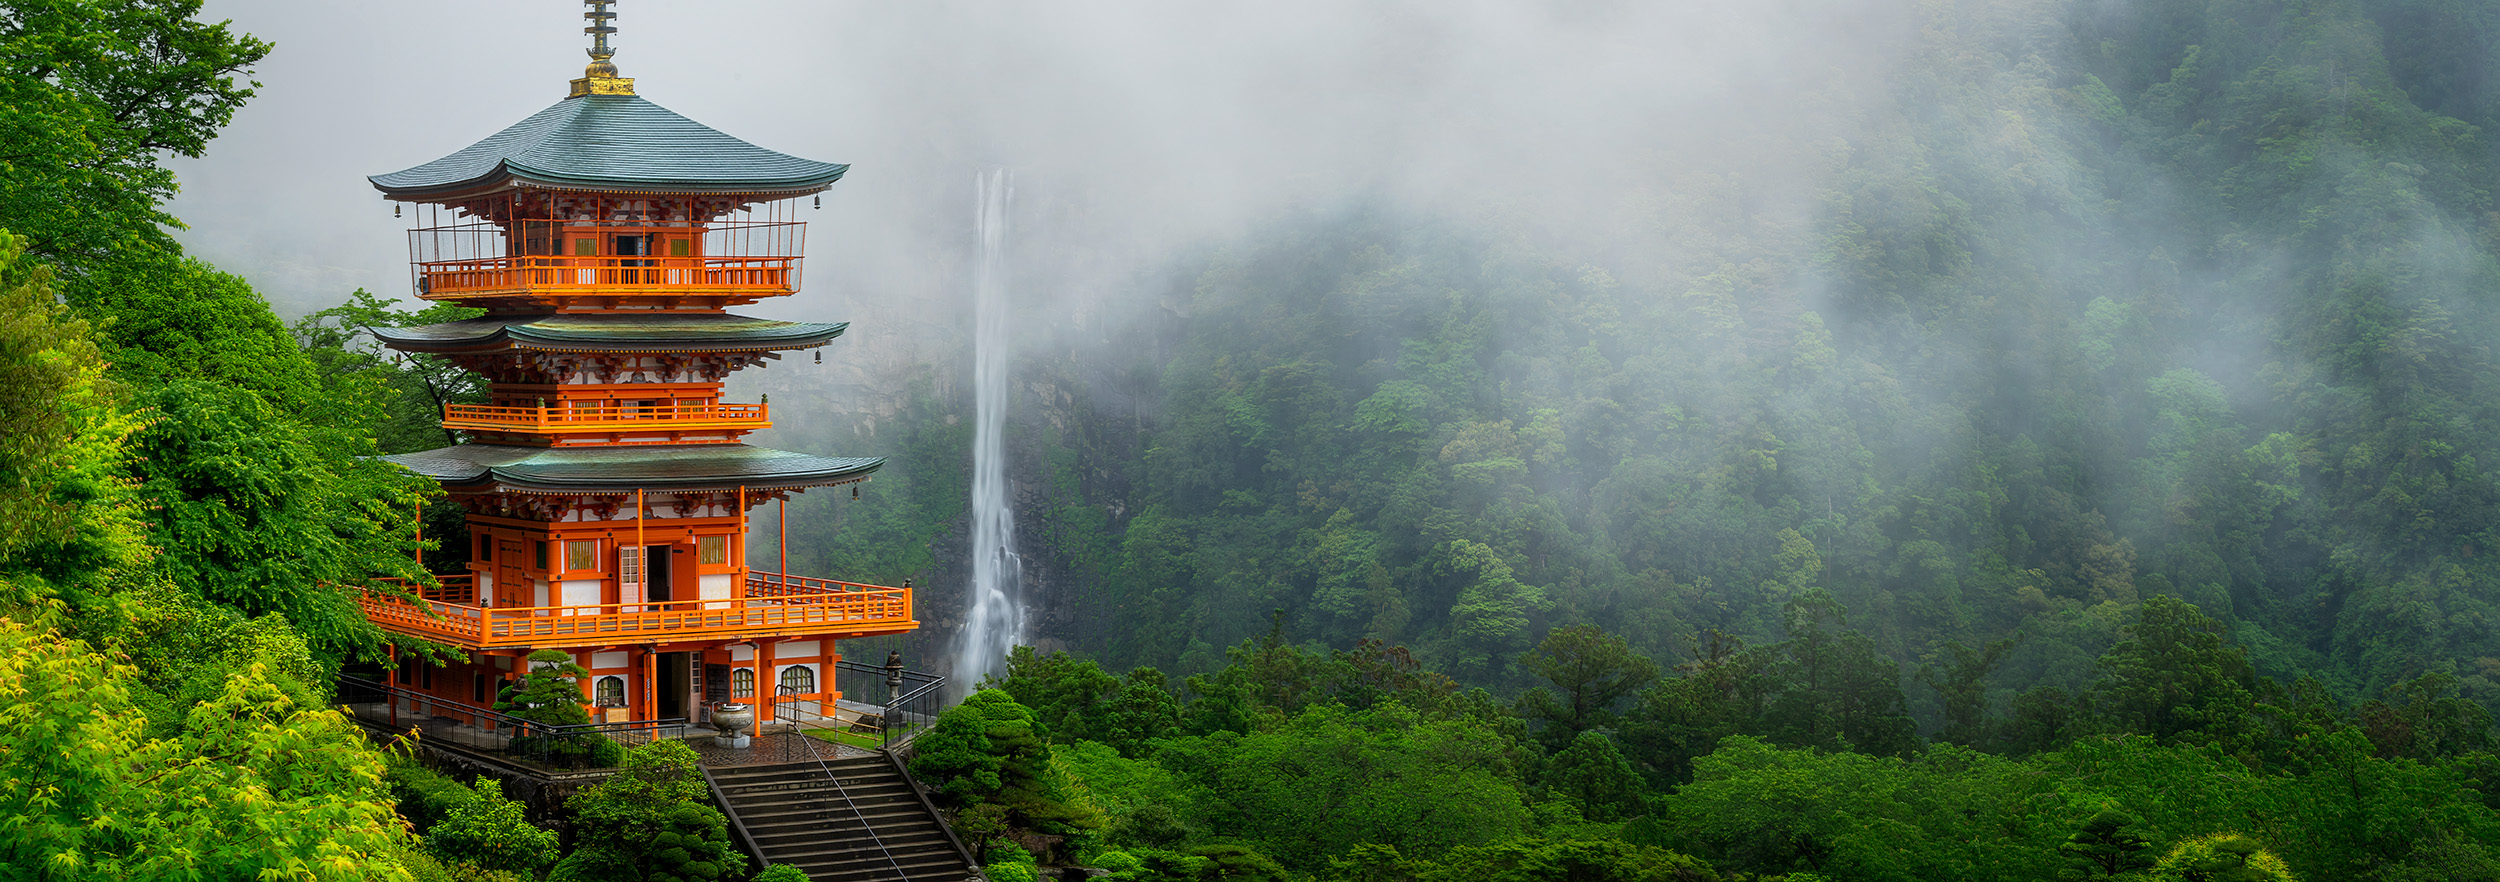 We arrived at Nachi Falls in mostly cloudy conditions and walked our ways up to the falls. I have a long series of shots from...